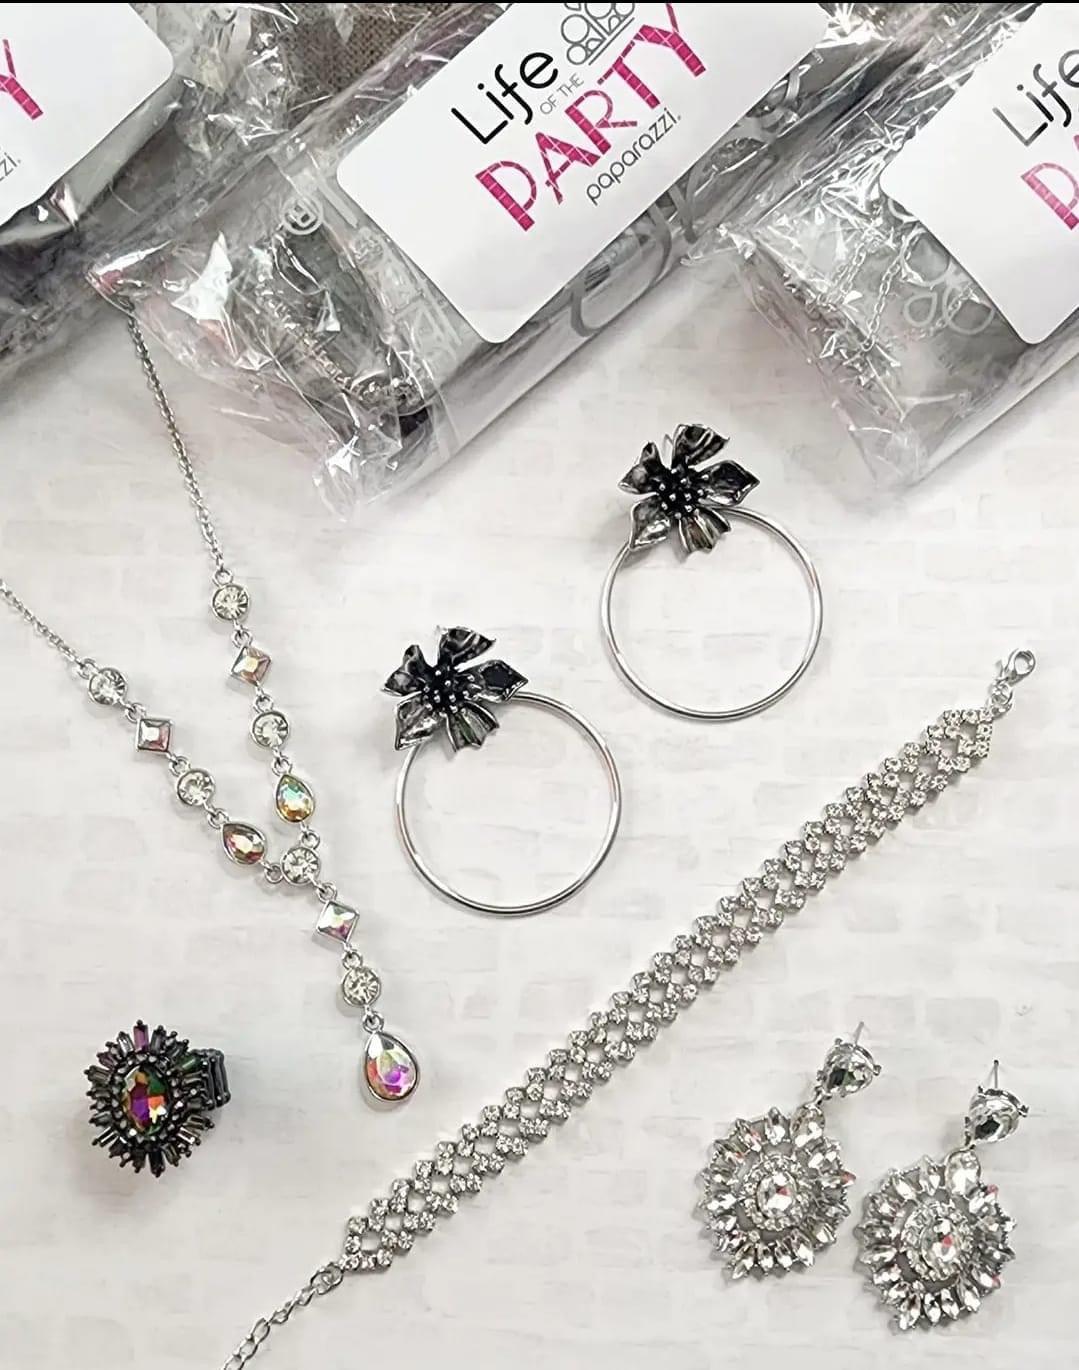 Paparazzi Accessories Life of The Party: August 2022 1-Forget the Crown Necklace 1-My Good LUXE Charm Earrings 1-Astral Attitude Ring 1-Seize the Sizzle Bracelet 1-Buttercup Bliss Earrings Jewelry Sets